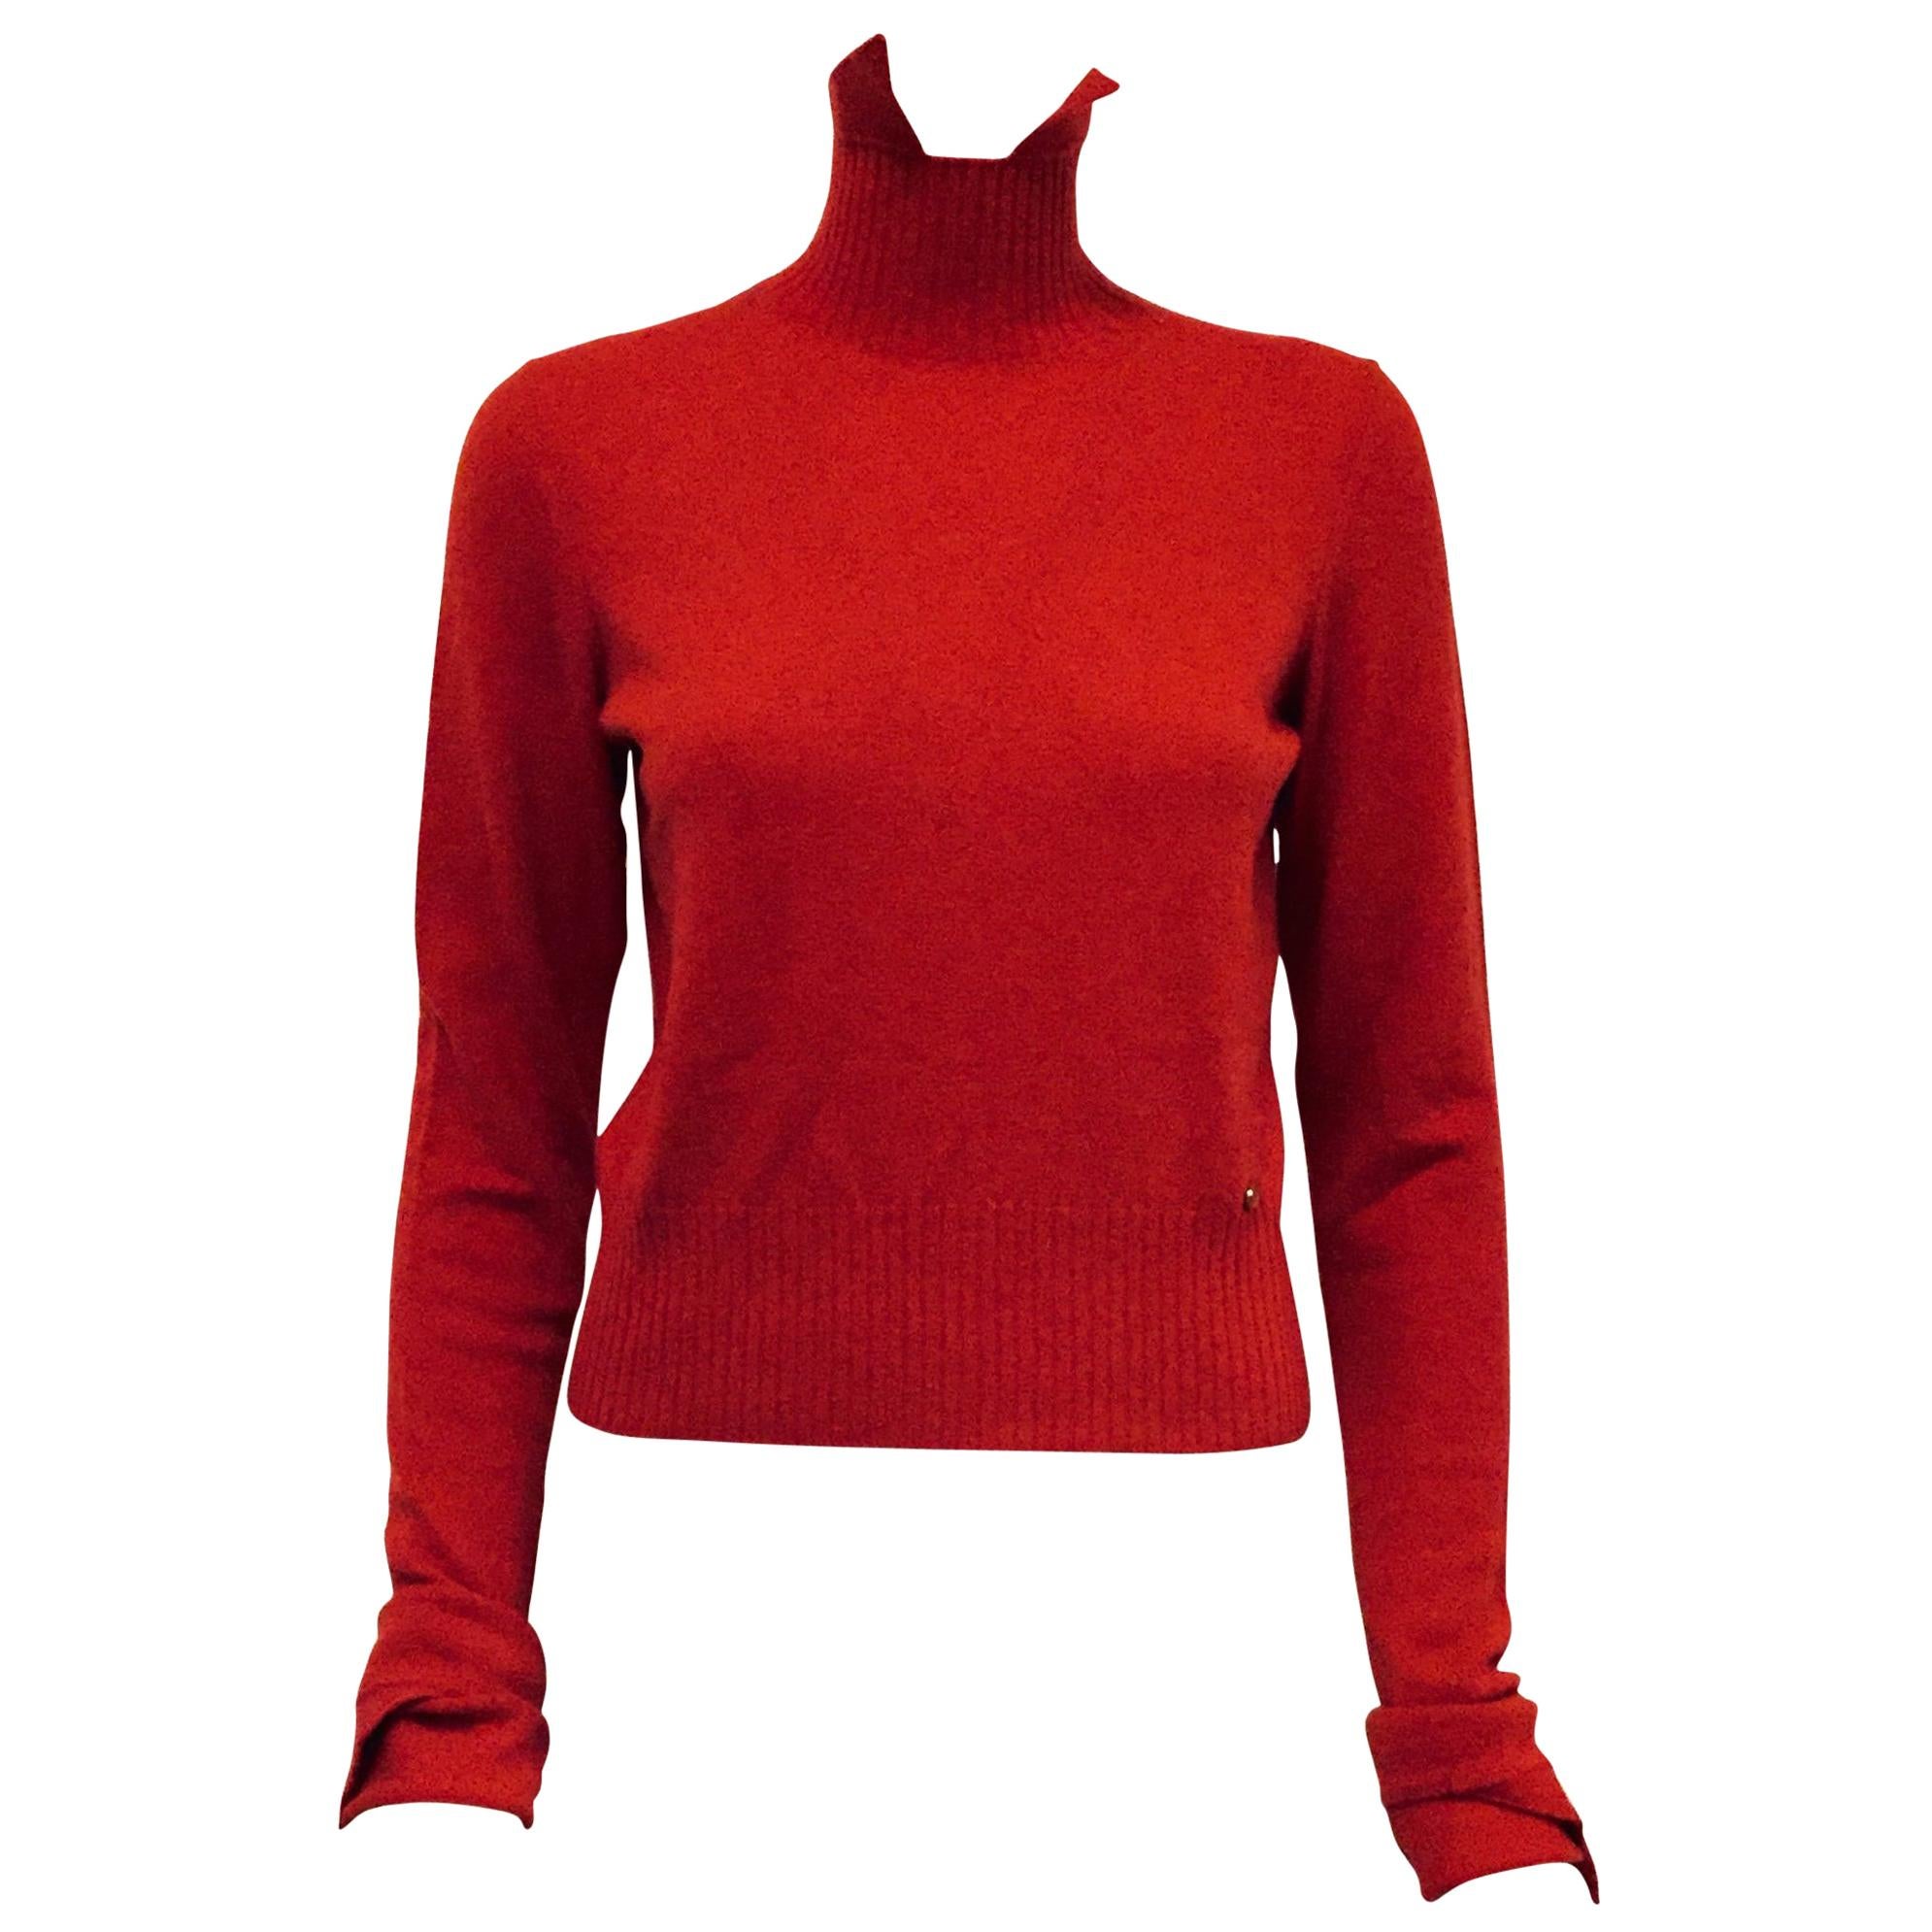 CHANEL, Sweaters, Host Pick Chanel Vintage Cashmere Sweater Cruise 998